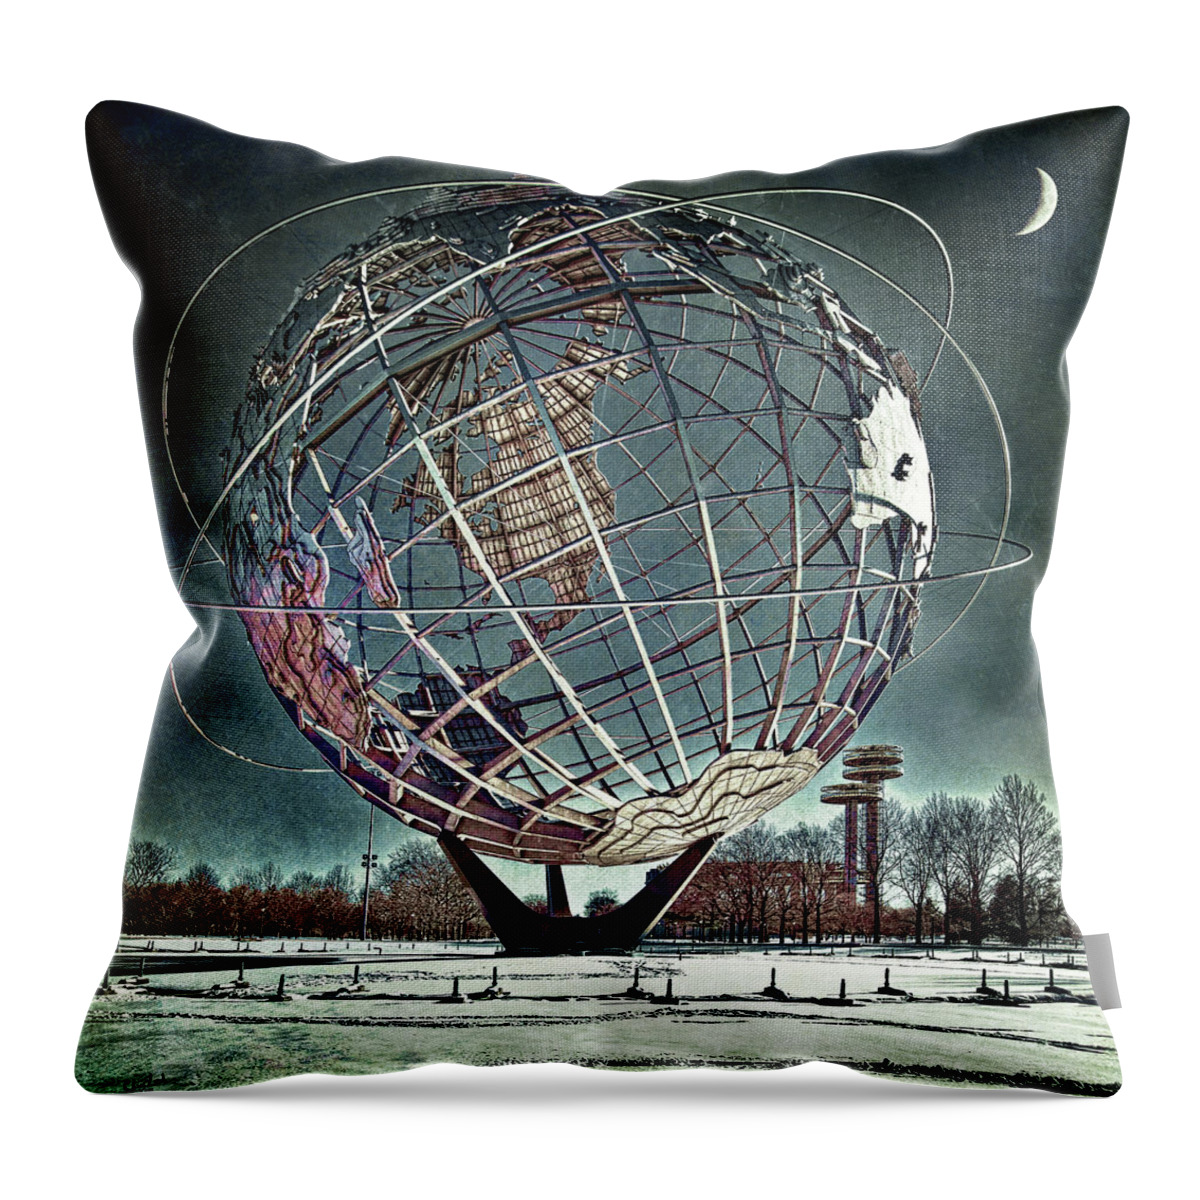 Unisphere Throw Pillow featuring the photograph Unisphere by Chris Lord